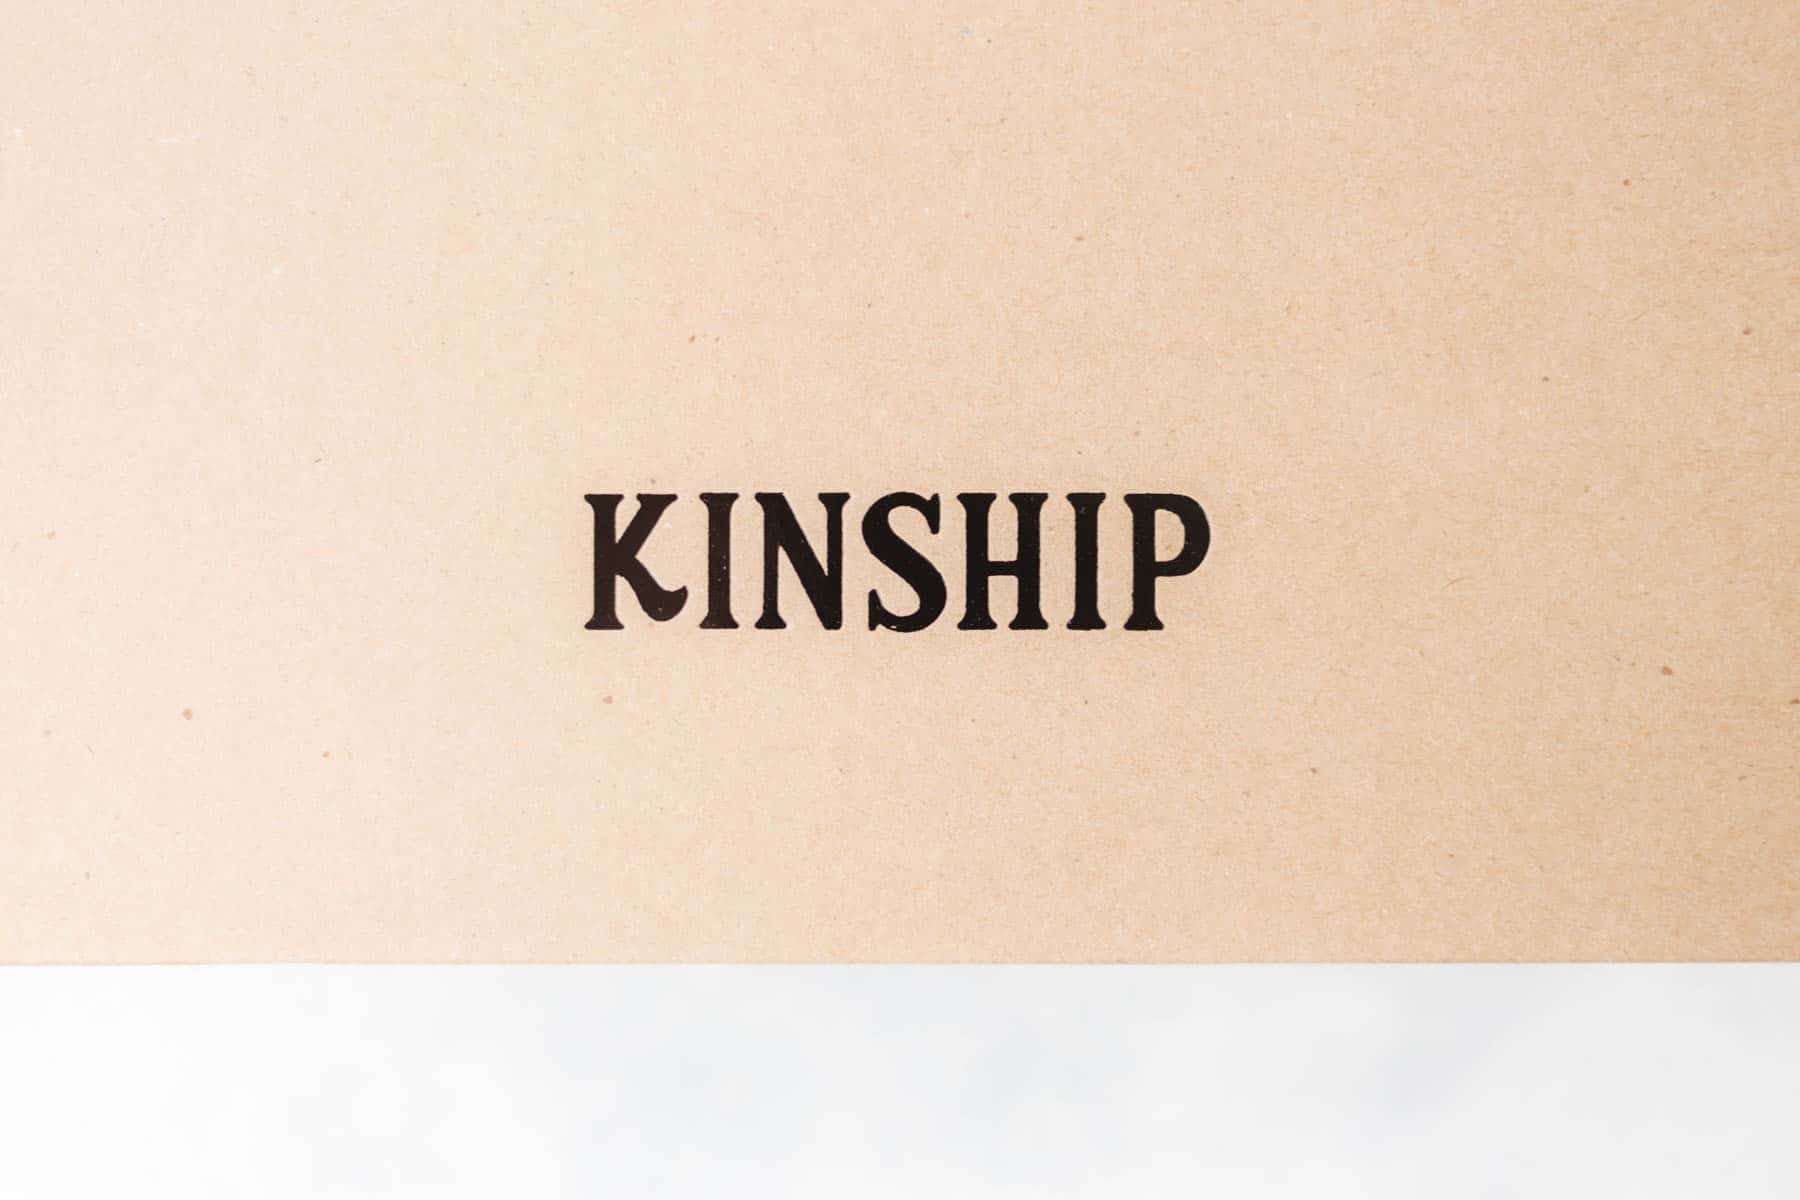 a box that says "Kinship" on it